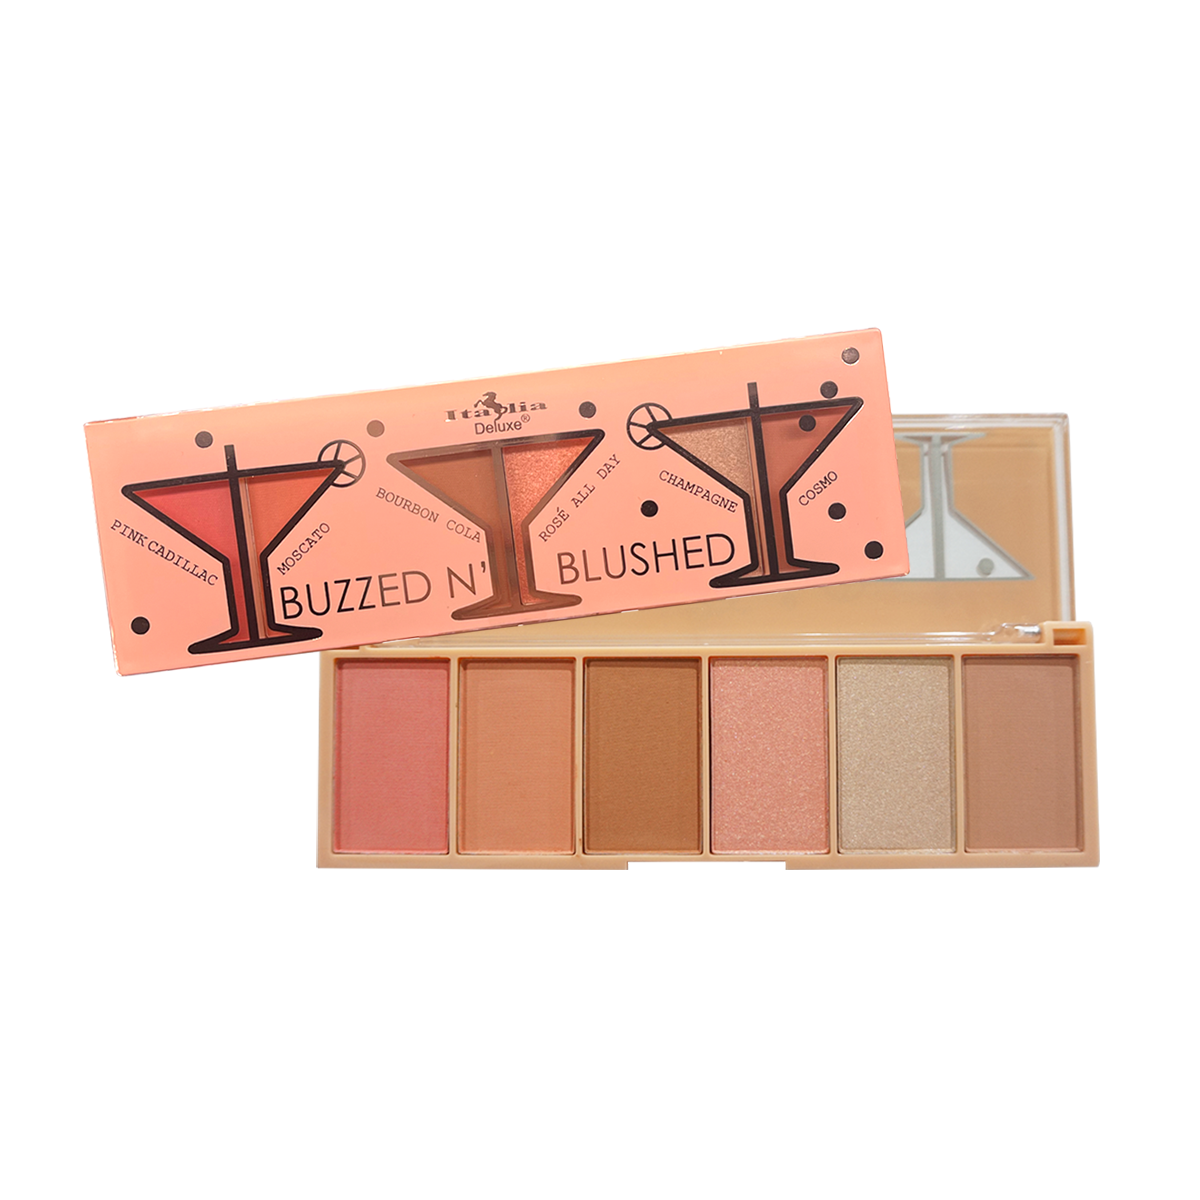 Italia Deluxe - Buzzed N' Blushed Blush & Highlighter Palette